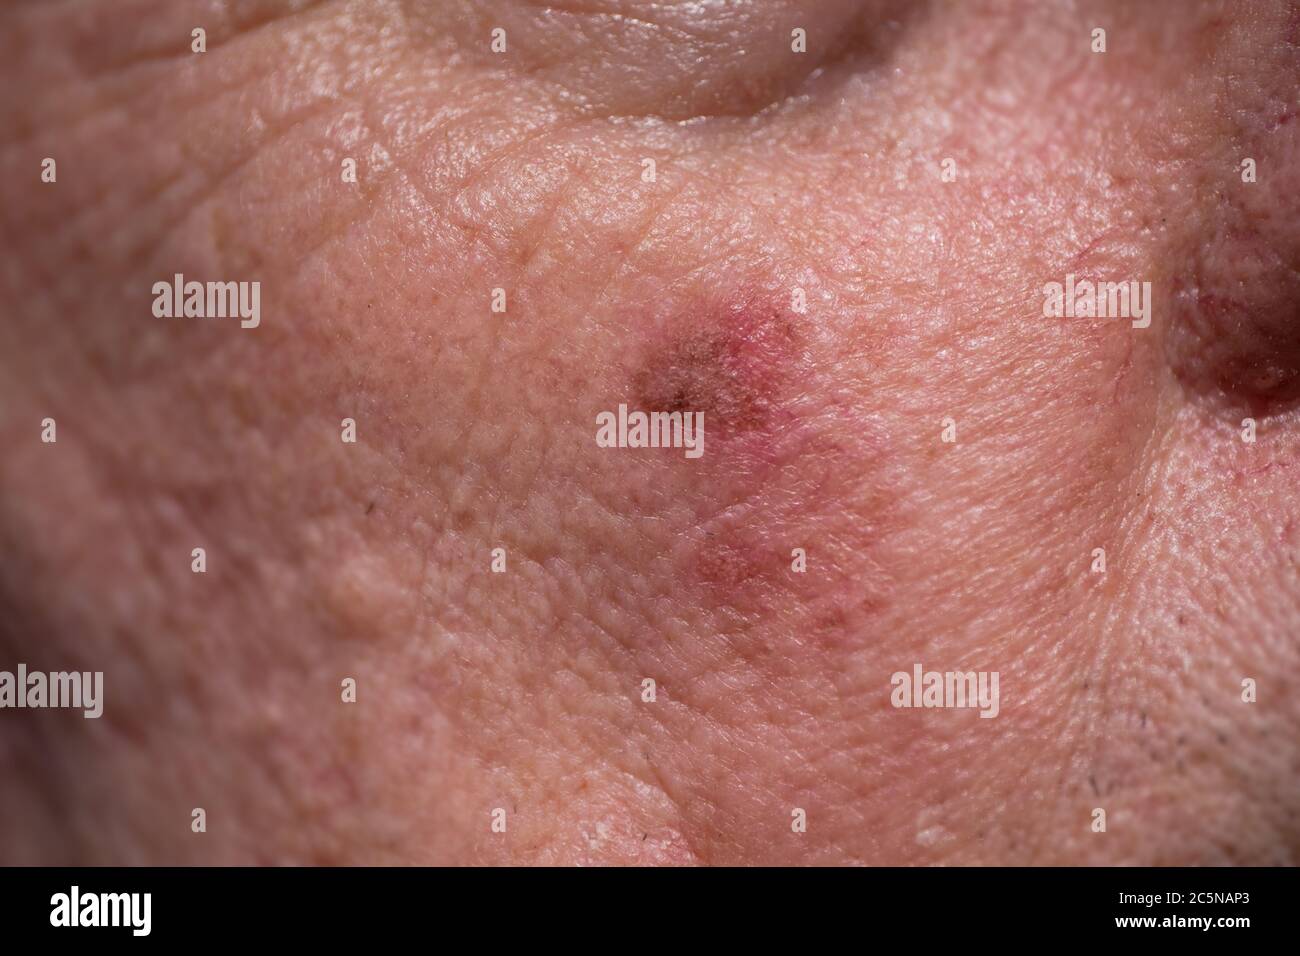 Red crusty lesions of actinic keratosis or sunspots on sun-damaged skin on the cheek under the right eye of a man Stock Photo